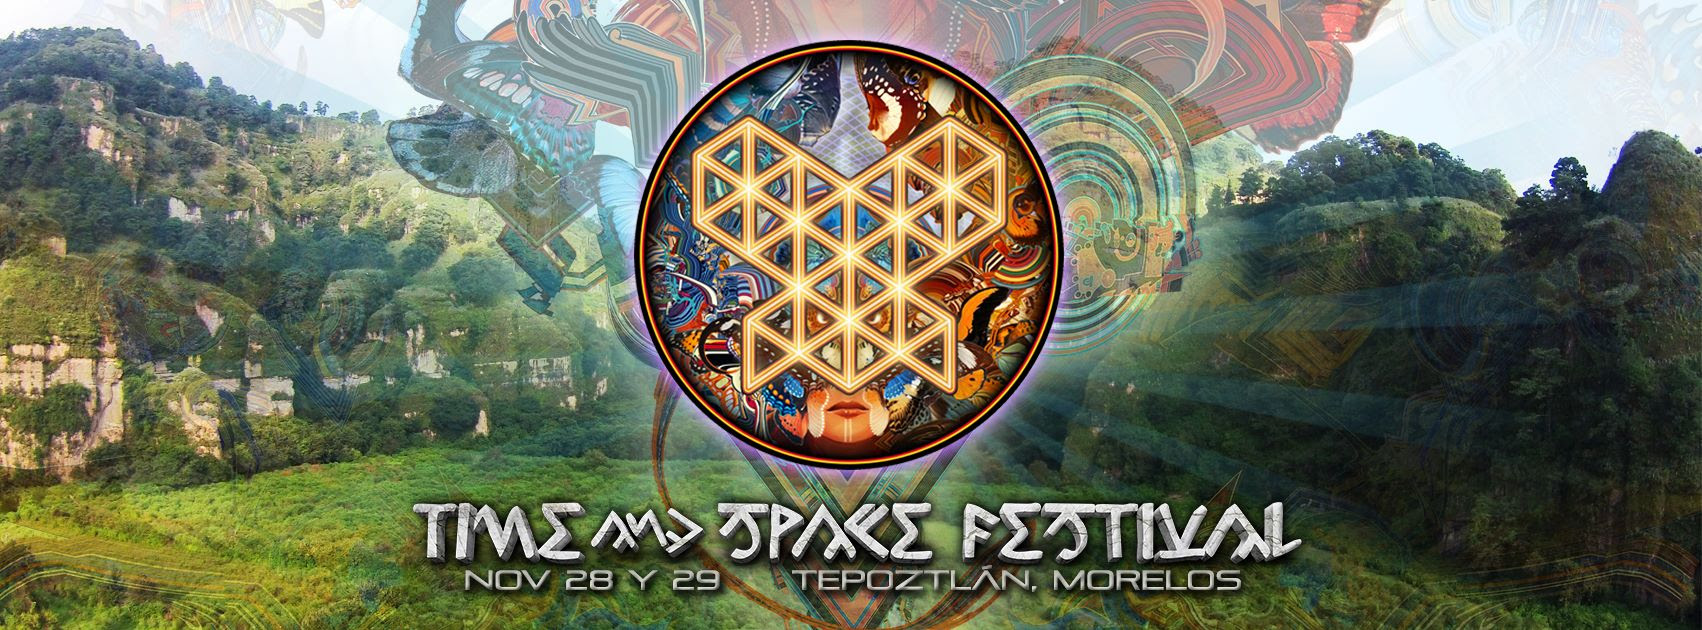 Time and Space Festival 2015 Banner 3